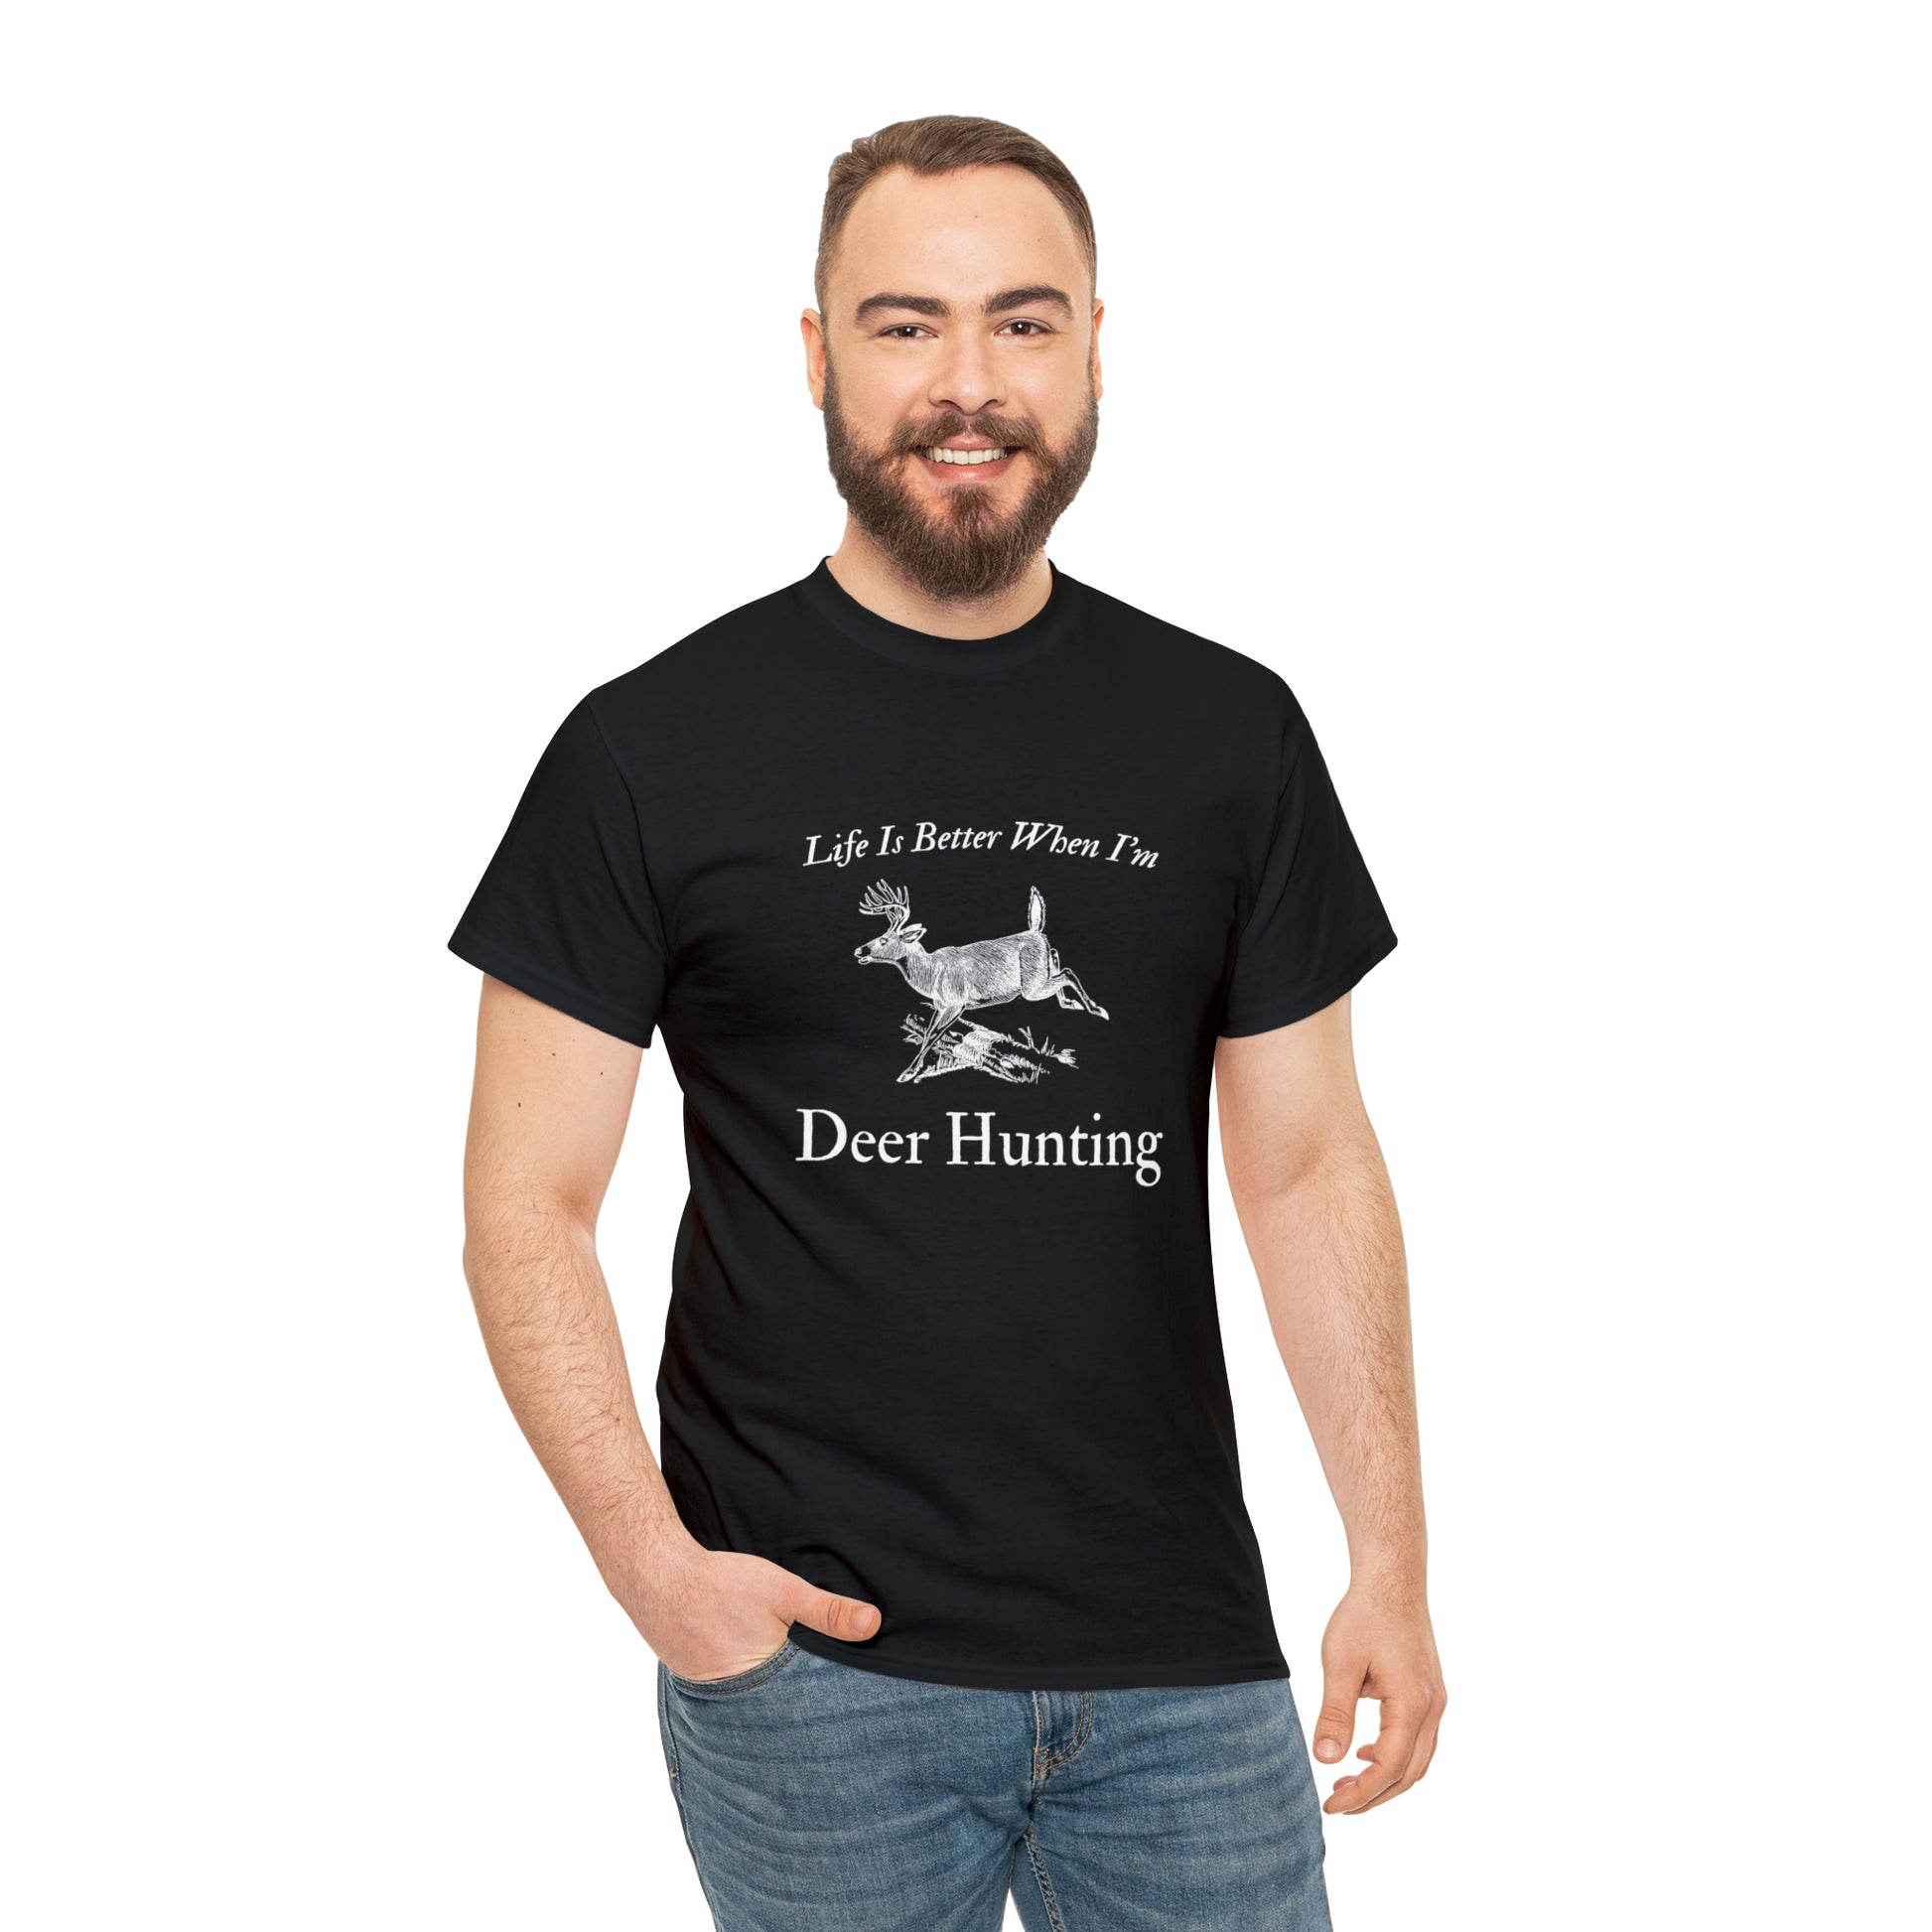 "Life Is Better When I'm Hunting" T-Shirt - Weave Got Gifts - Unique Gifts You Won’t Find Anywhere Else!